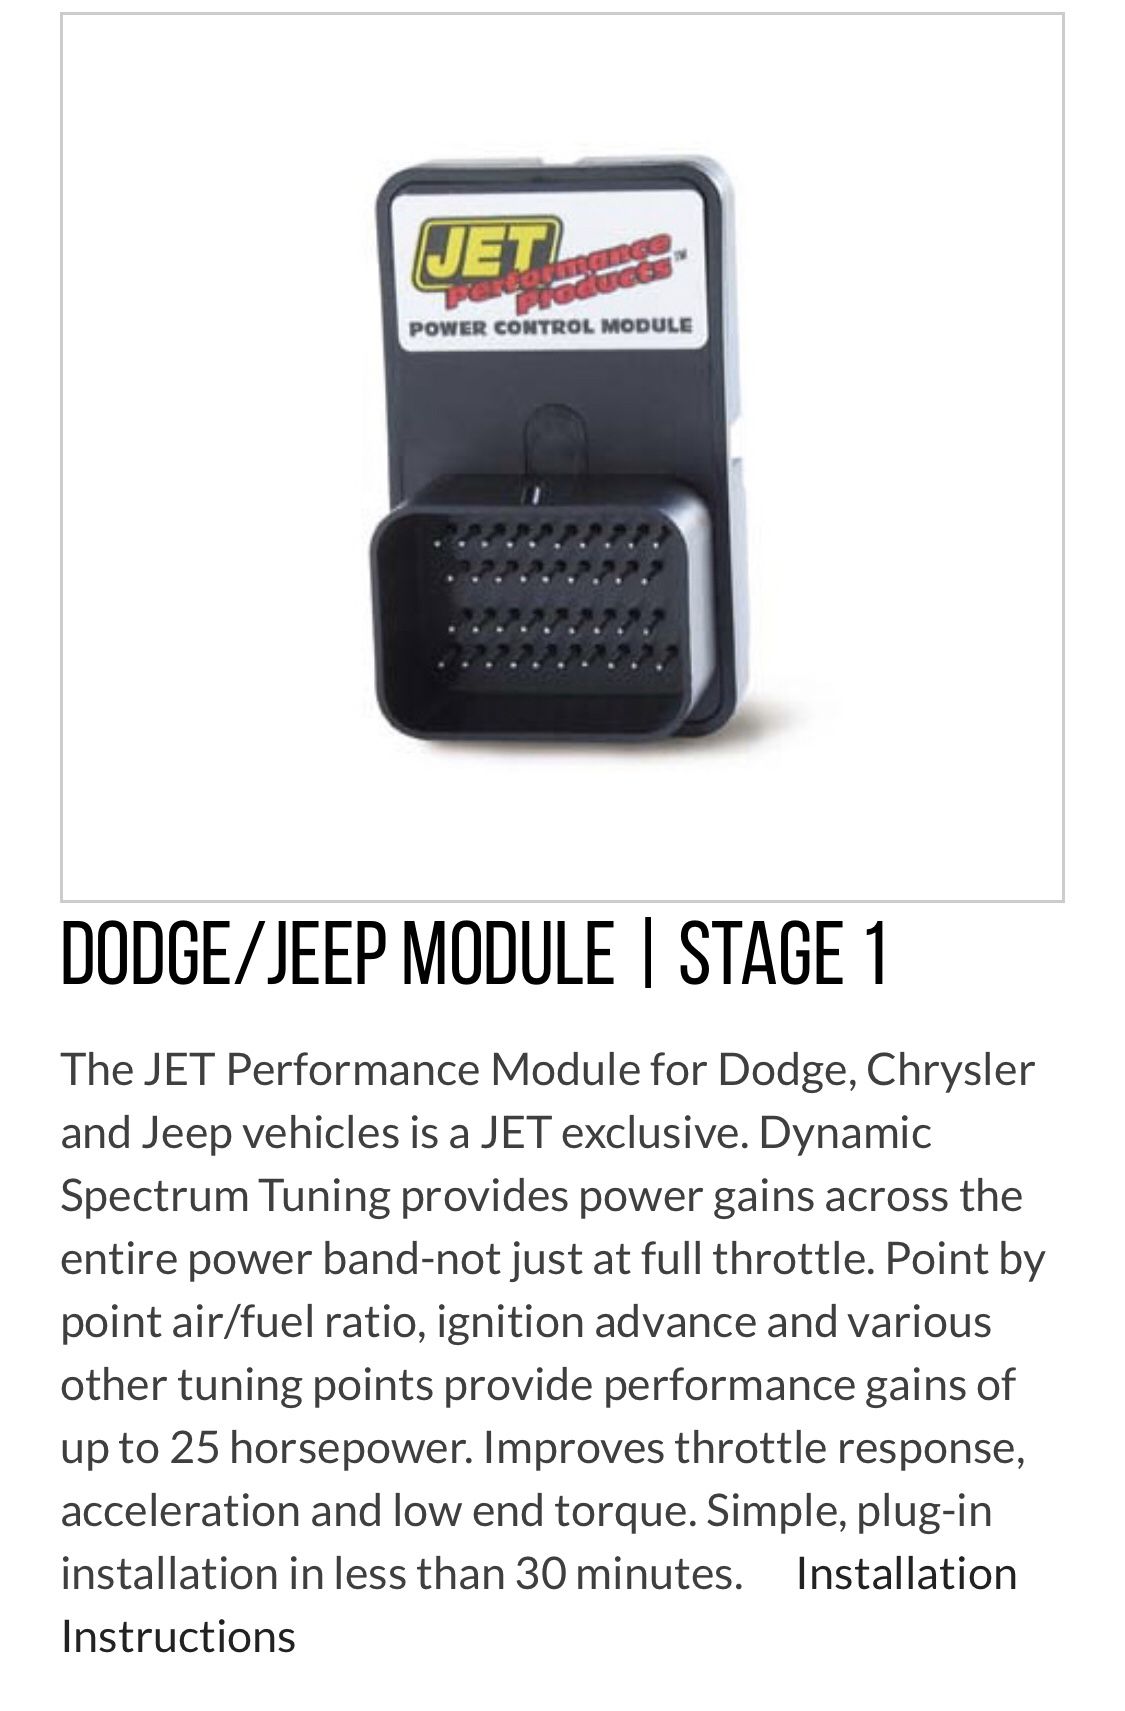 Dodge Charger /Jeep Chip performance